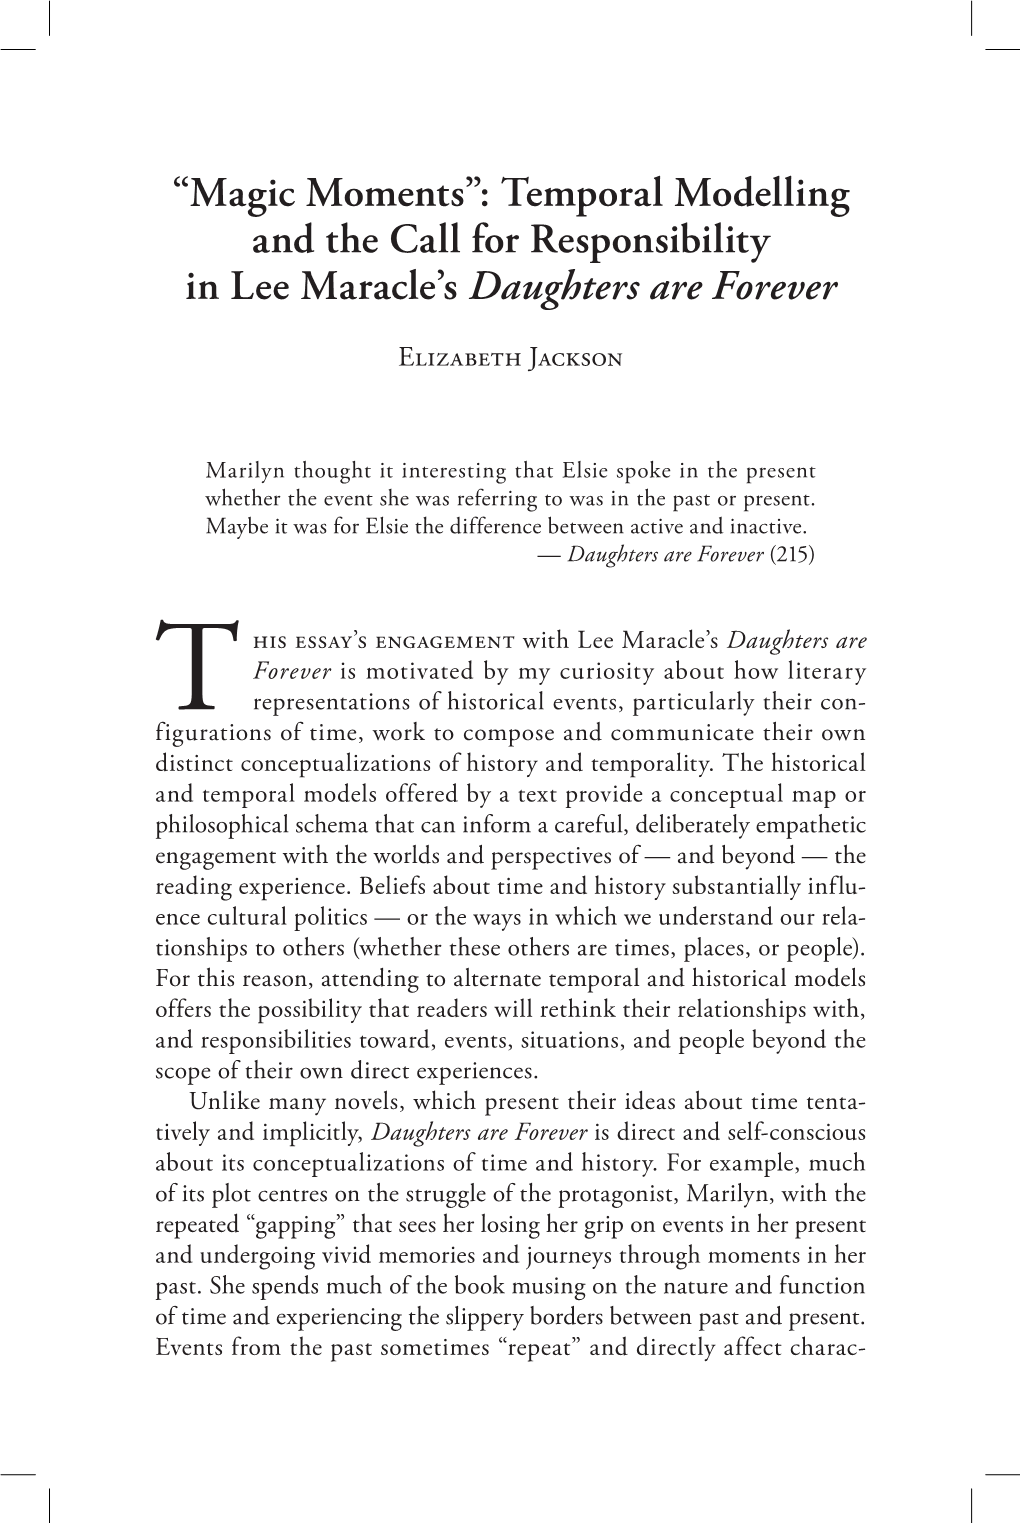 Temporal Modelling and the Call for Responsibility in Lee Maracle's